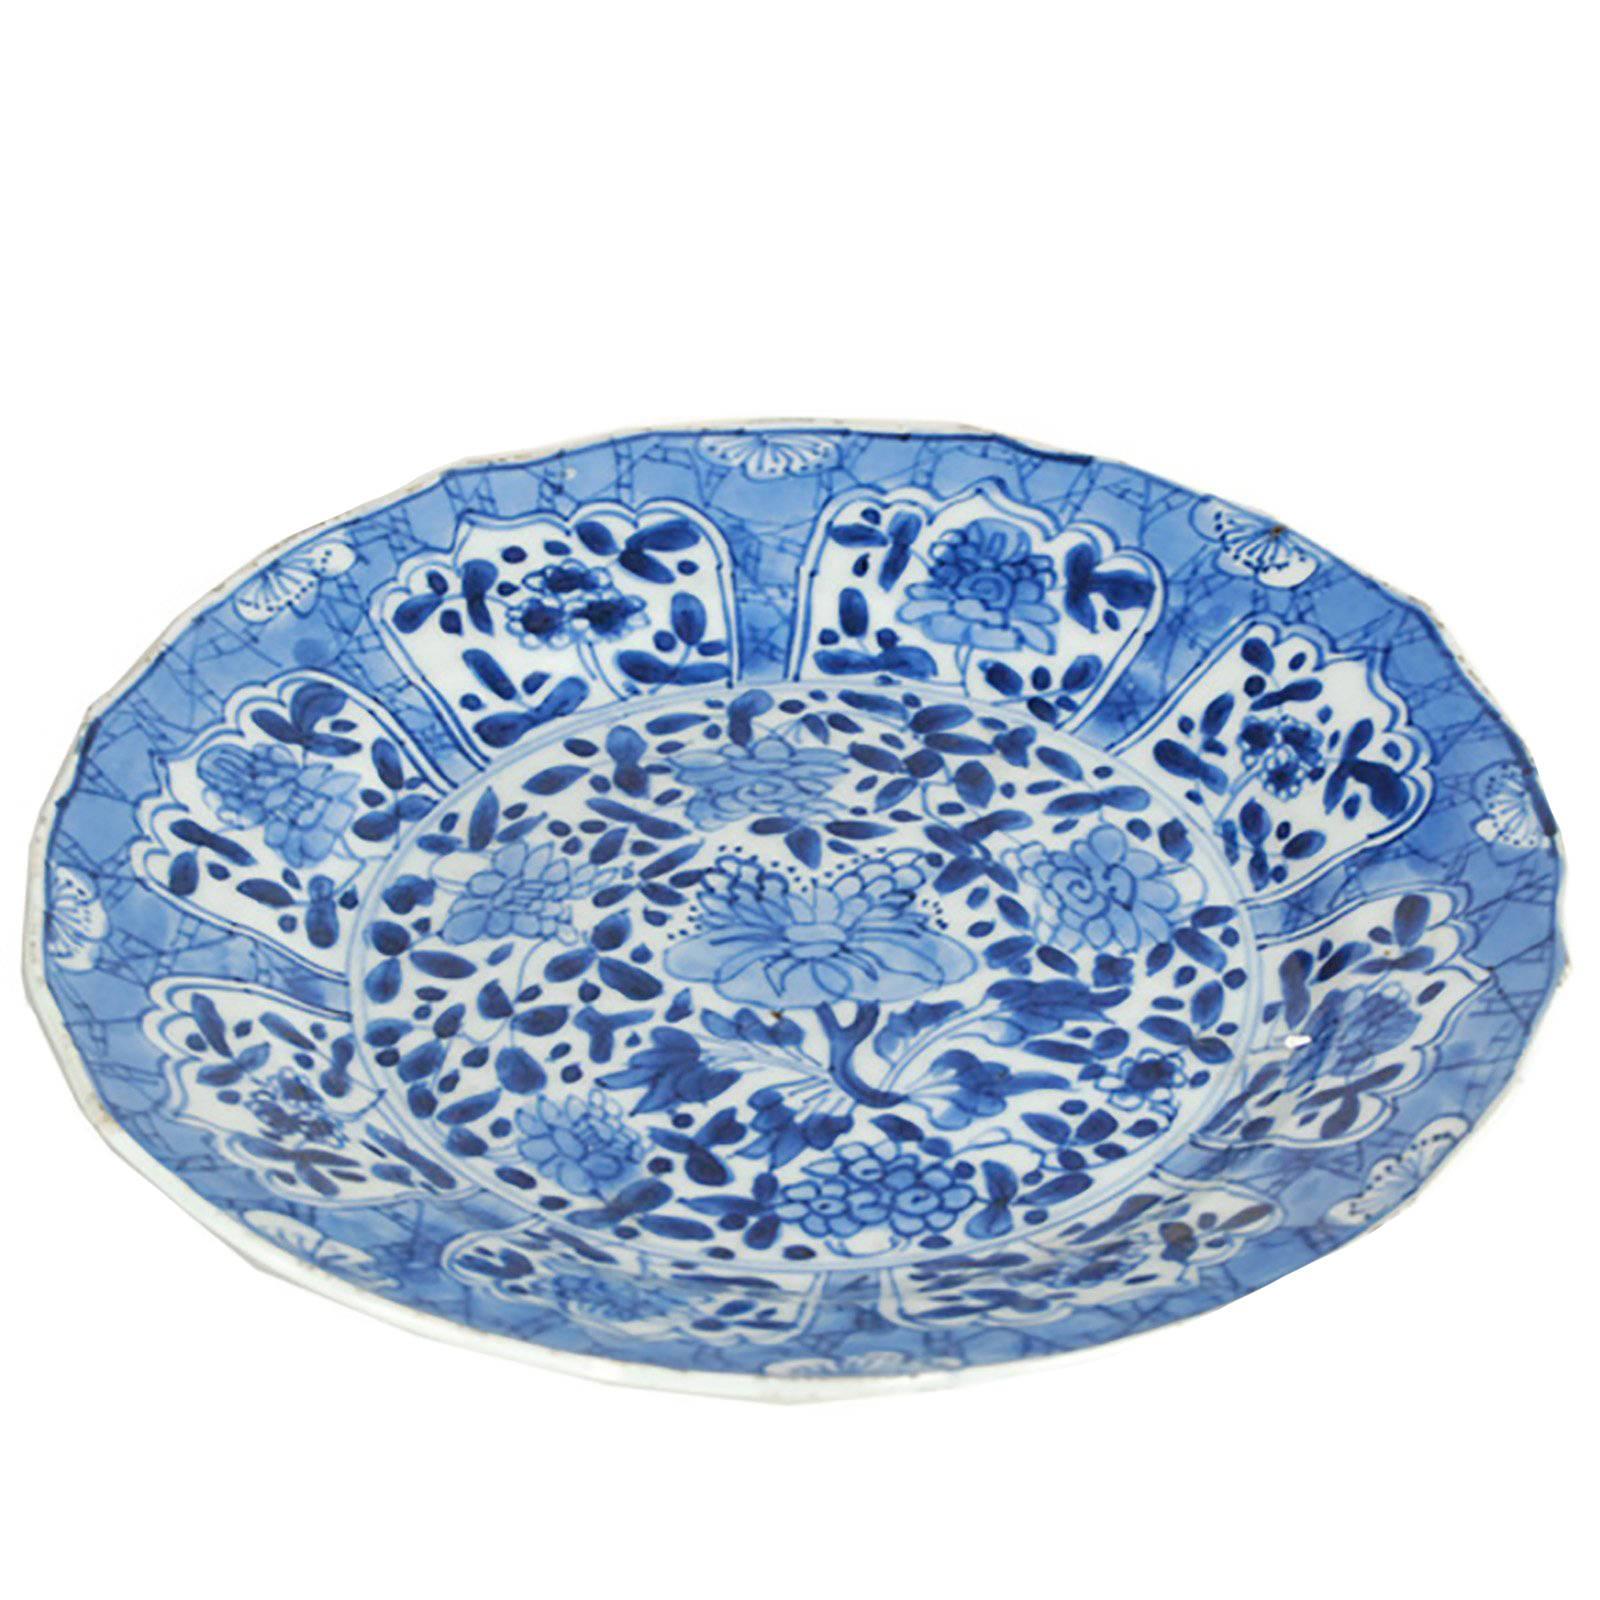 Chinese Floral Motif Plate Made for European Export